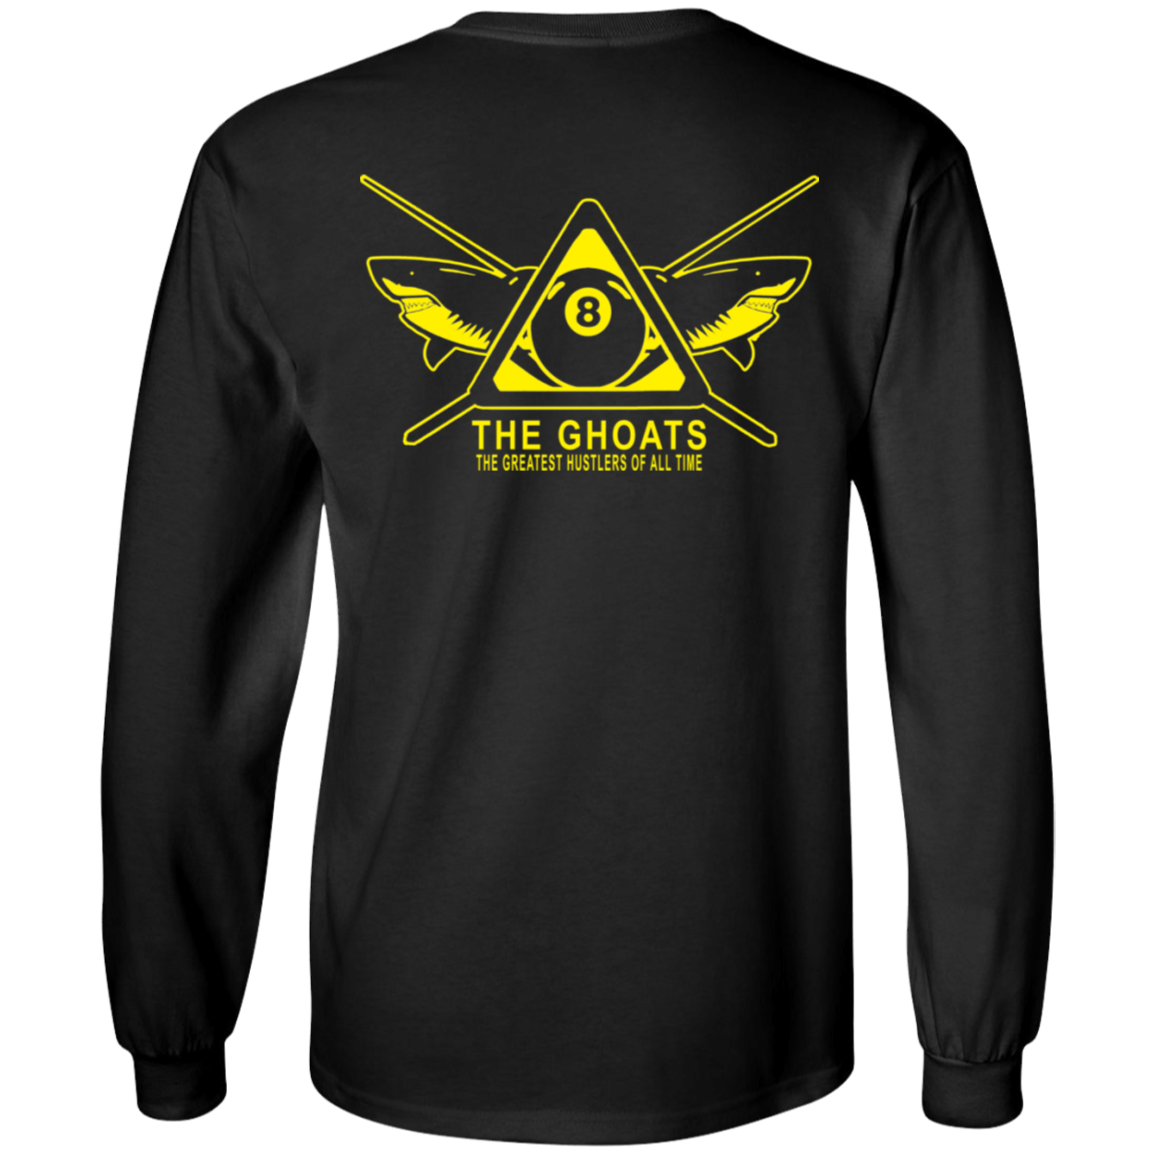 The GHOATS Custom Design #35. Beware of Sharks. Shoot at Your Own Risk. 100% Basic Cotton Long Sleeve